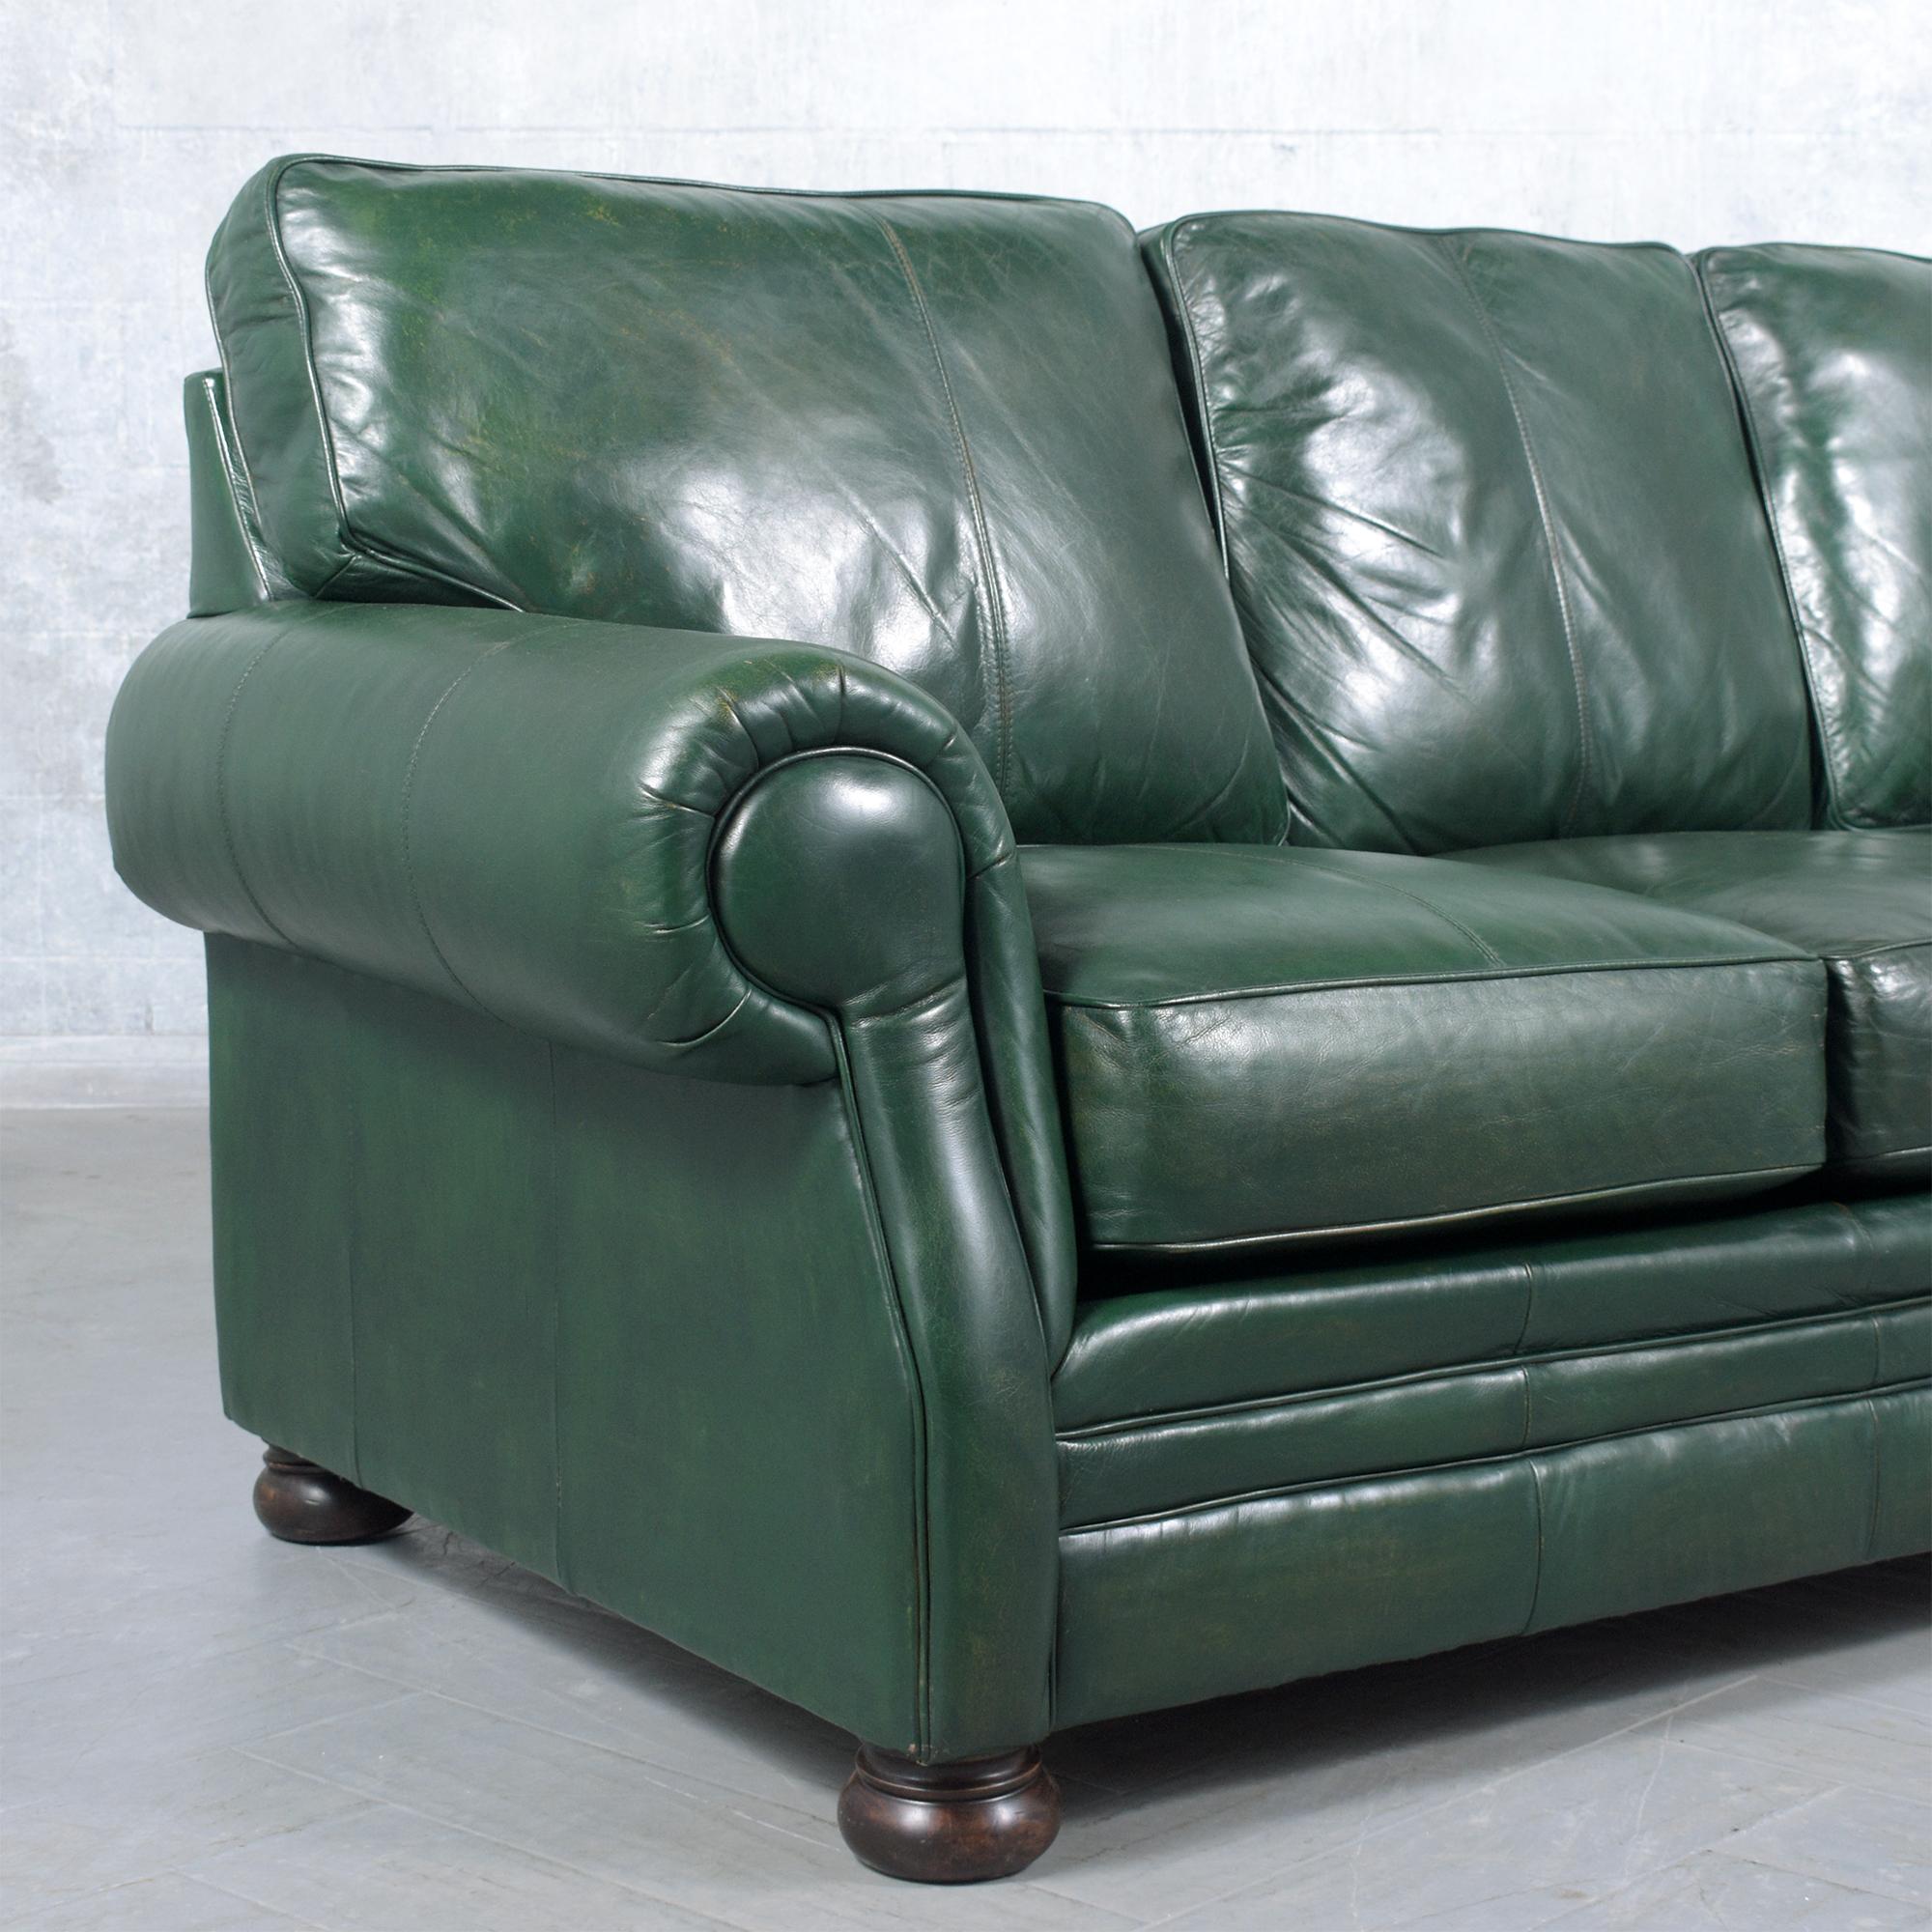 Late 20th Century Restored 1980s Vintage Leather Sofa in Dark Green with Carved Bun Legs For Sale